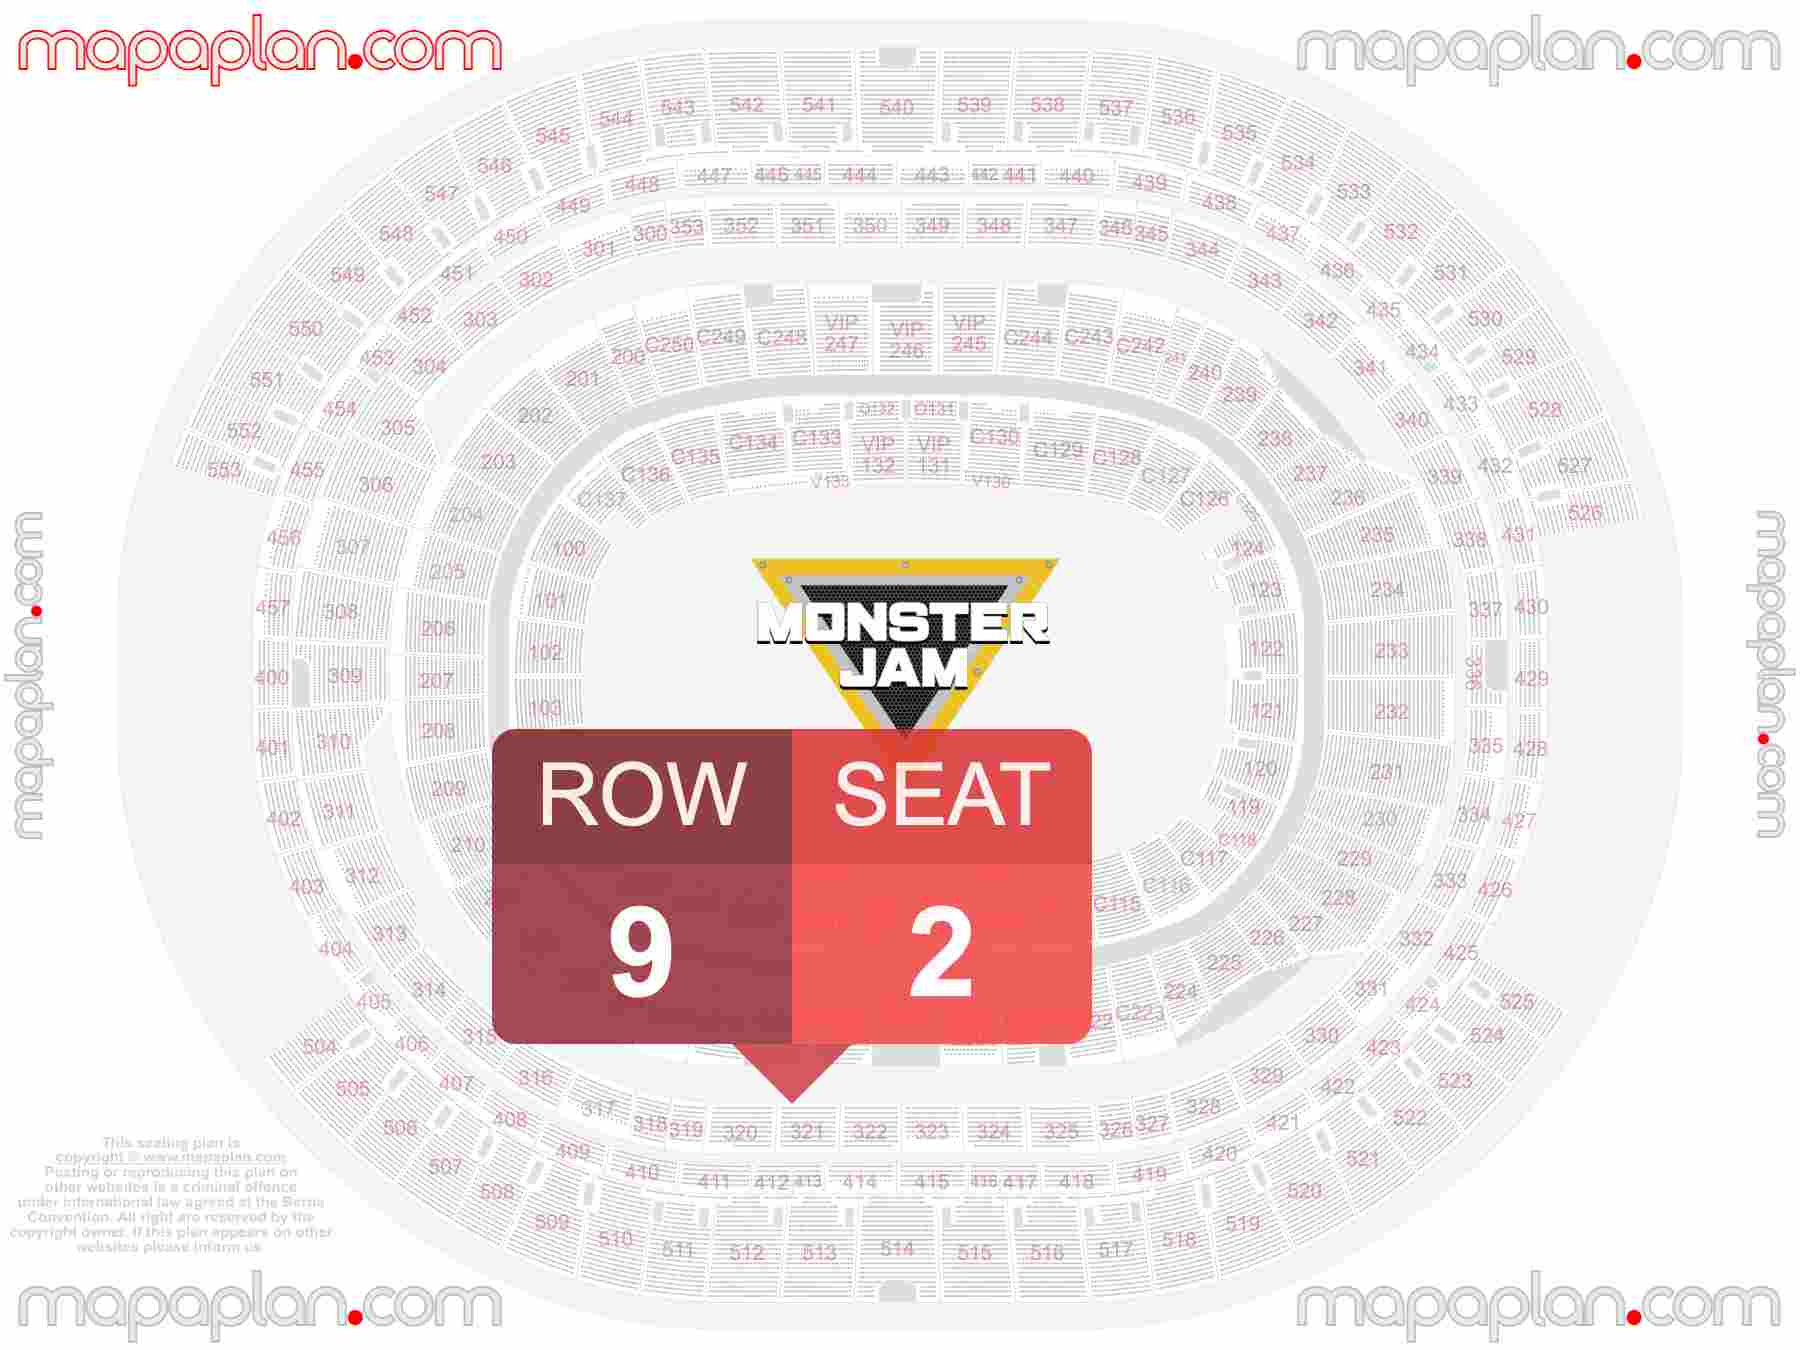 Los Angeles SoFi Stadium seating chart Monster Jam Truck seating chart with exact section numbers showing best rows and seats selection 3d layout - Best interactive seat finder tool with precise detailed location data